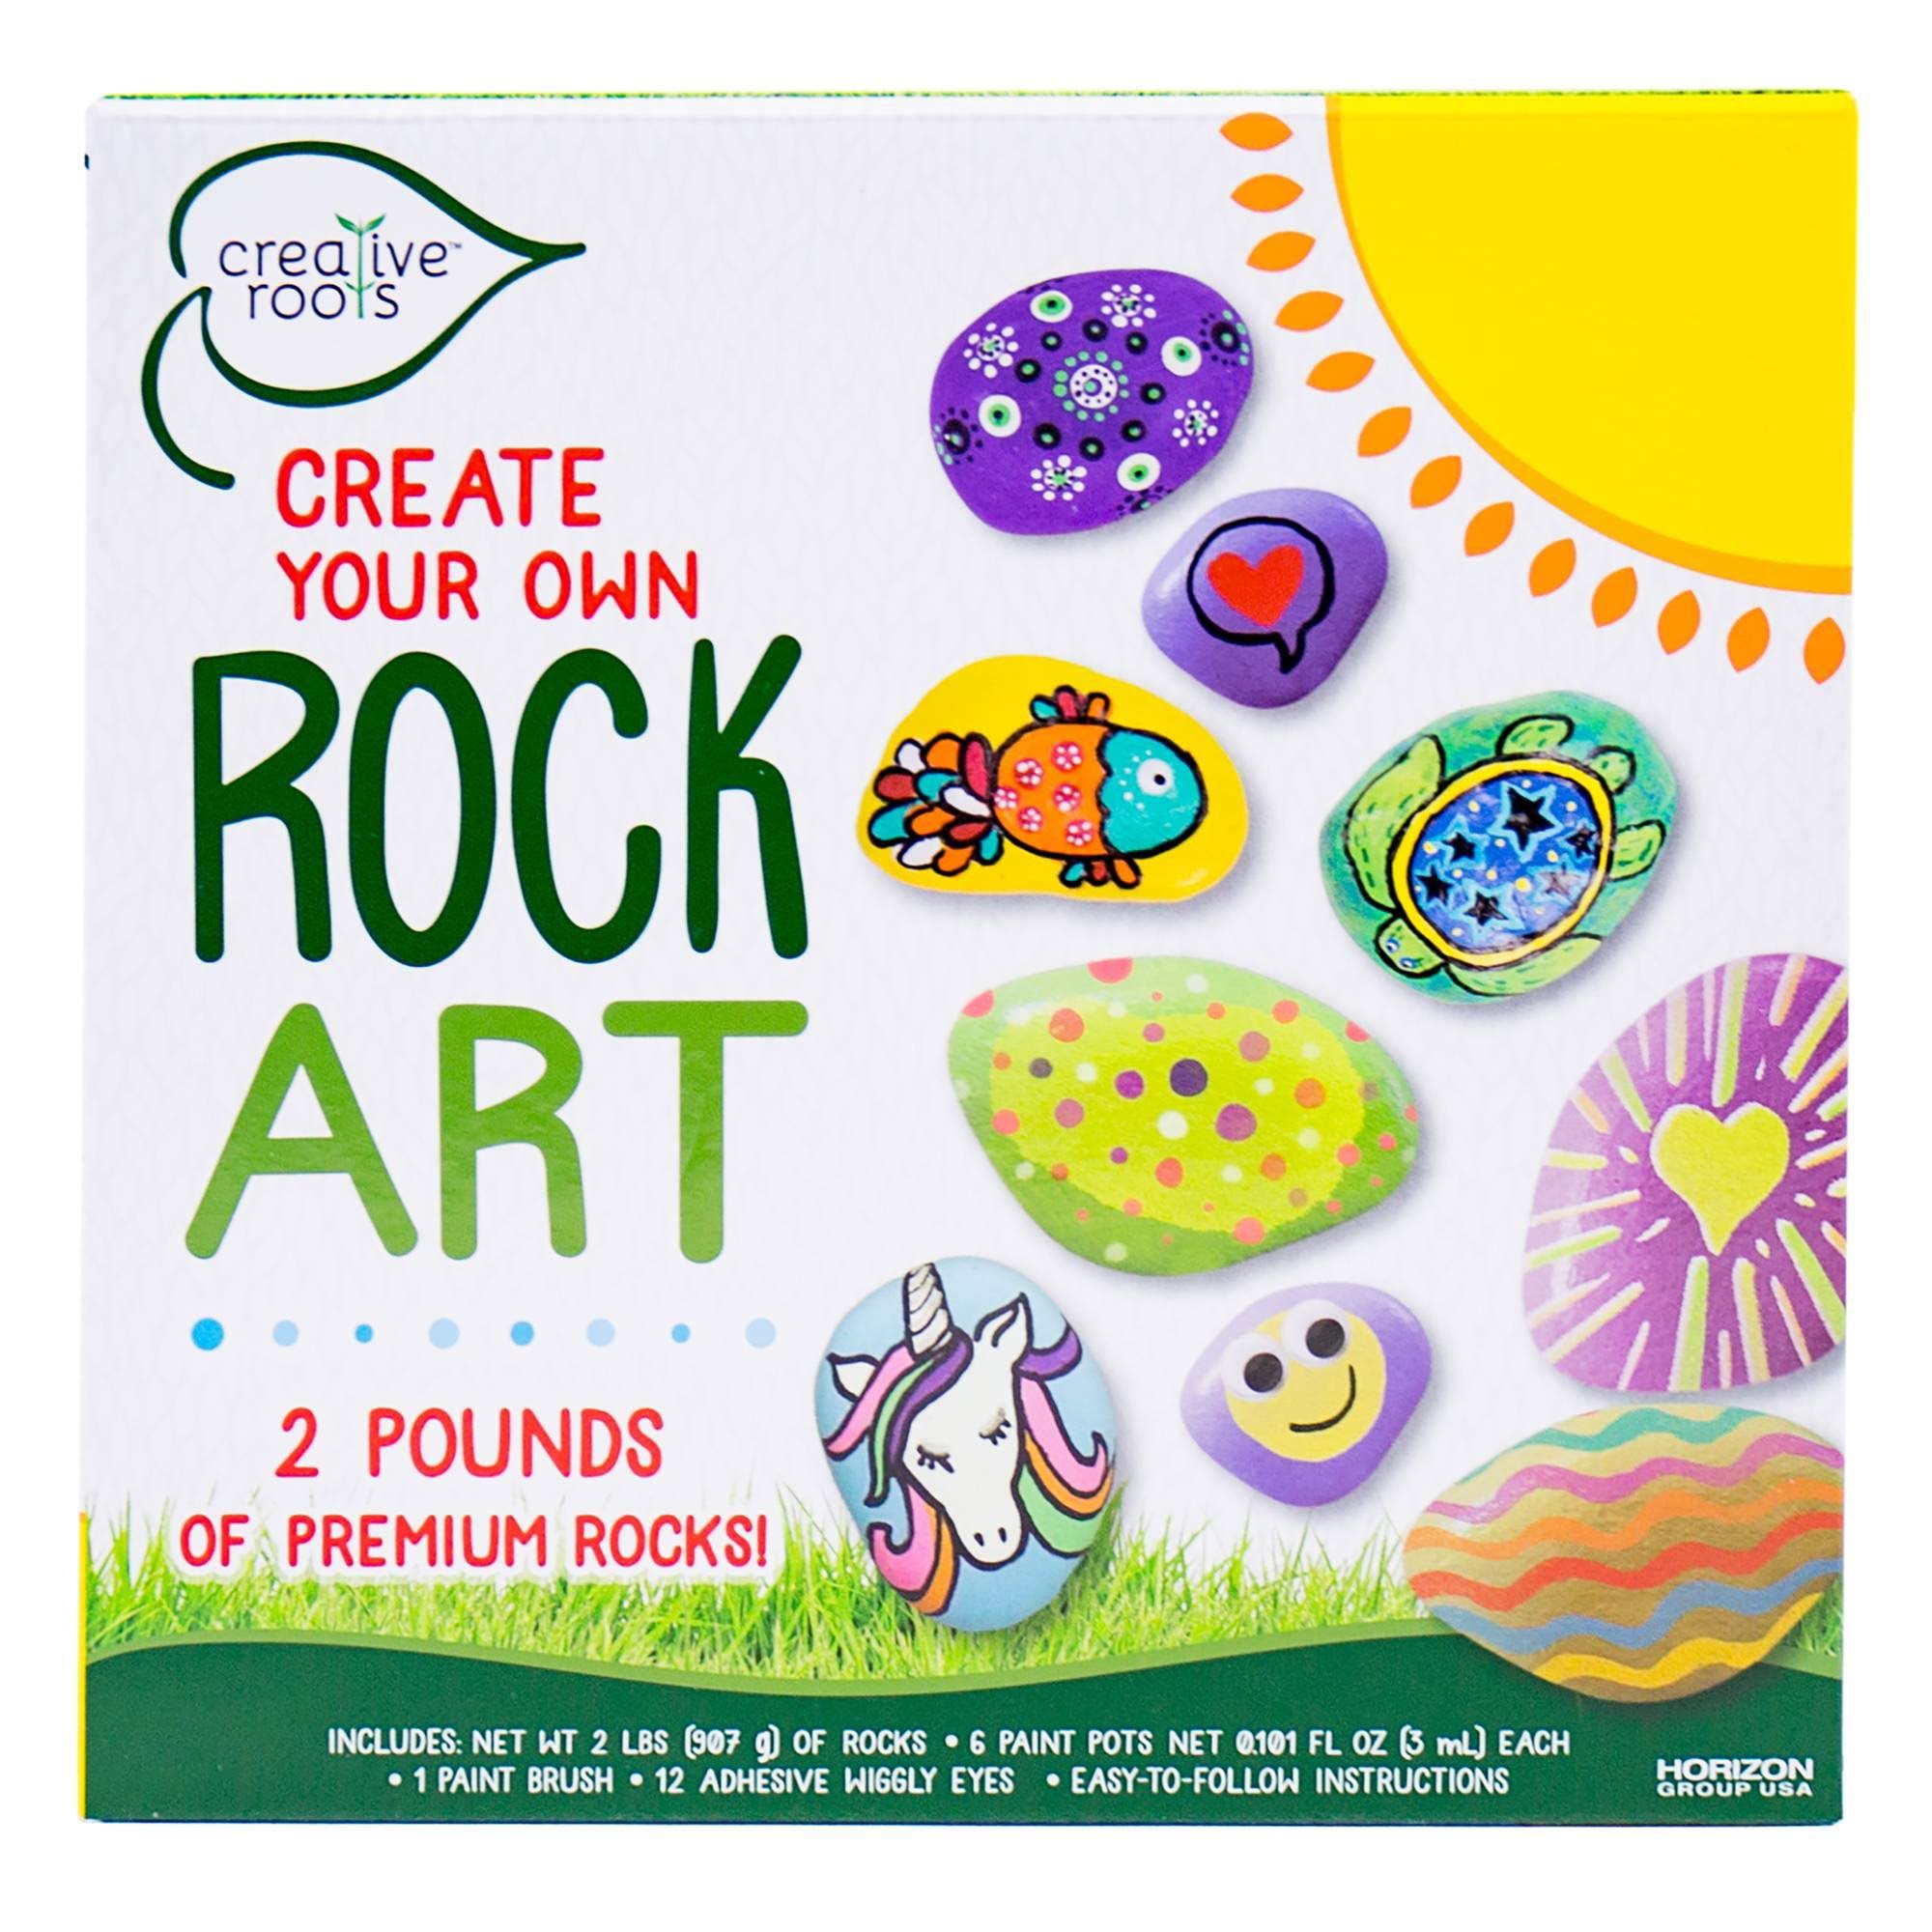 Creative Roots Create Your Own Rock Art Kit